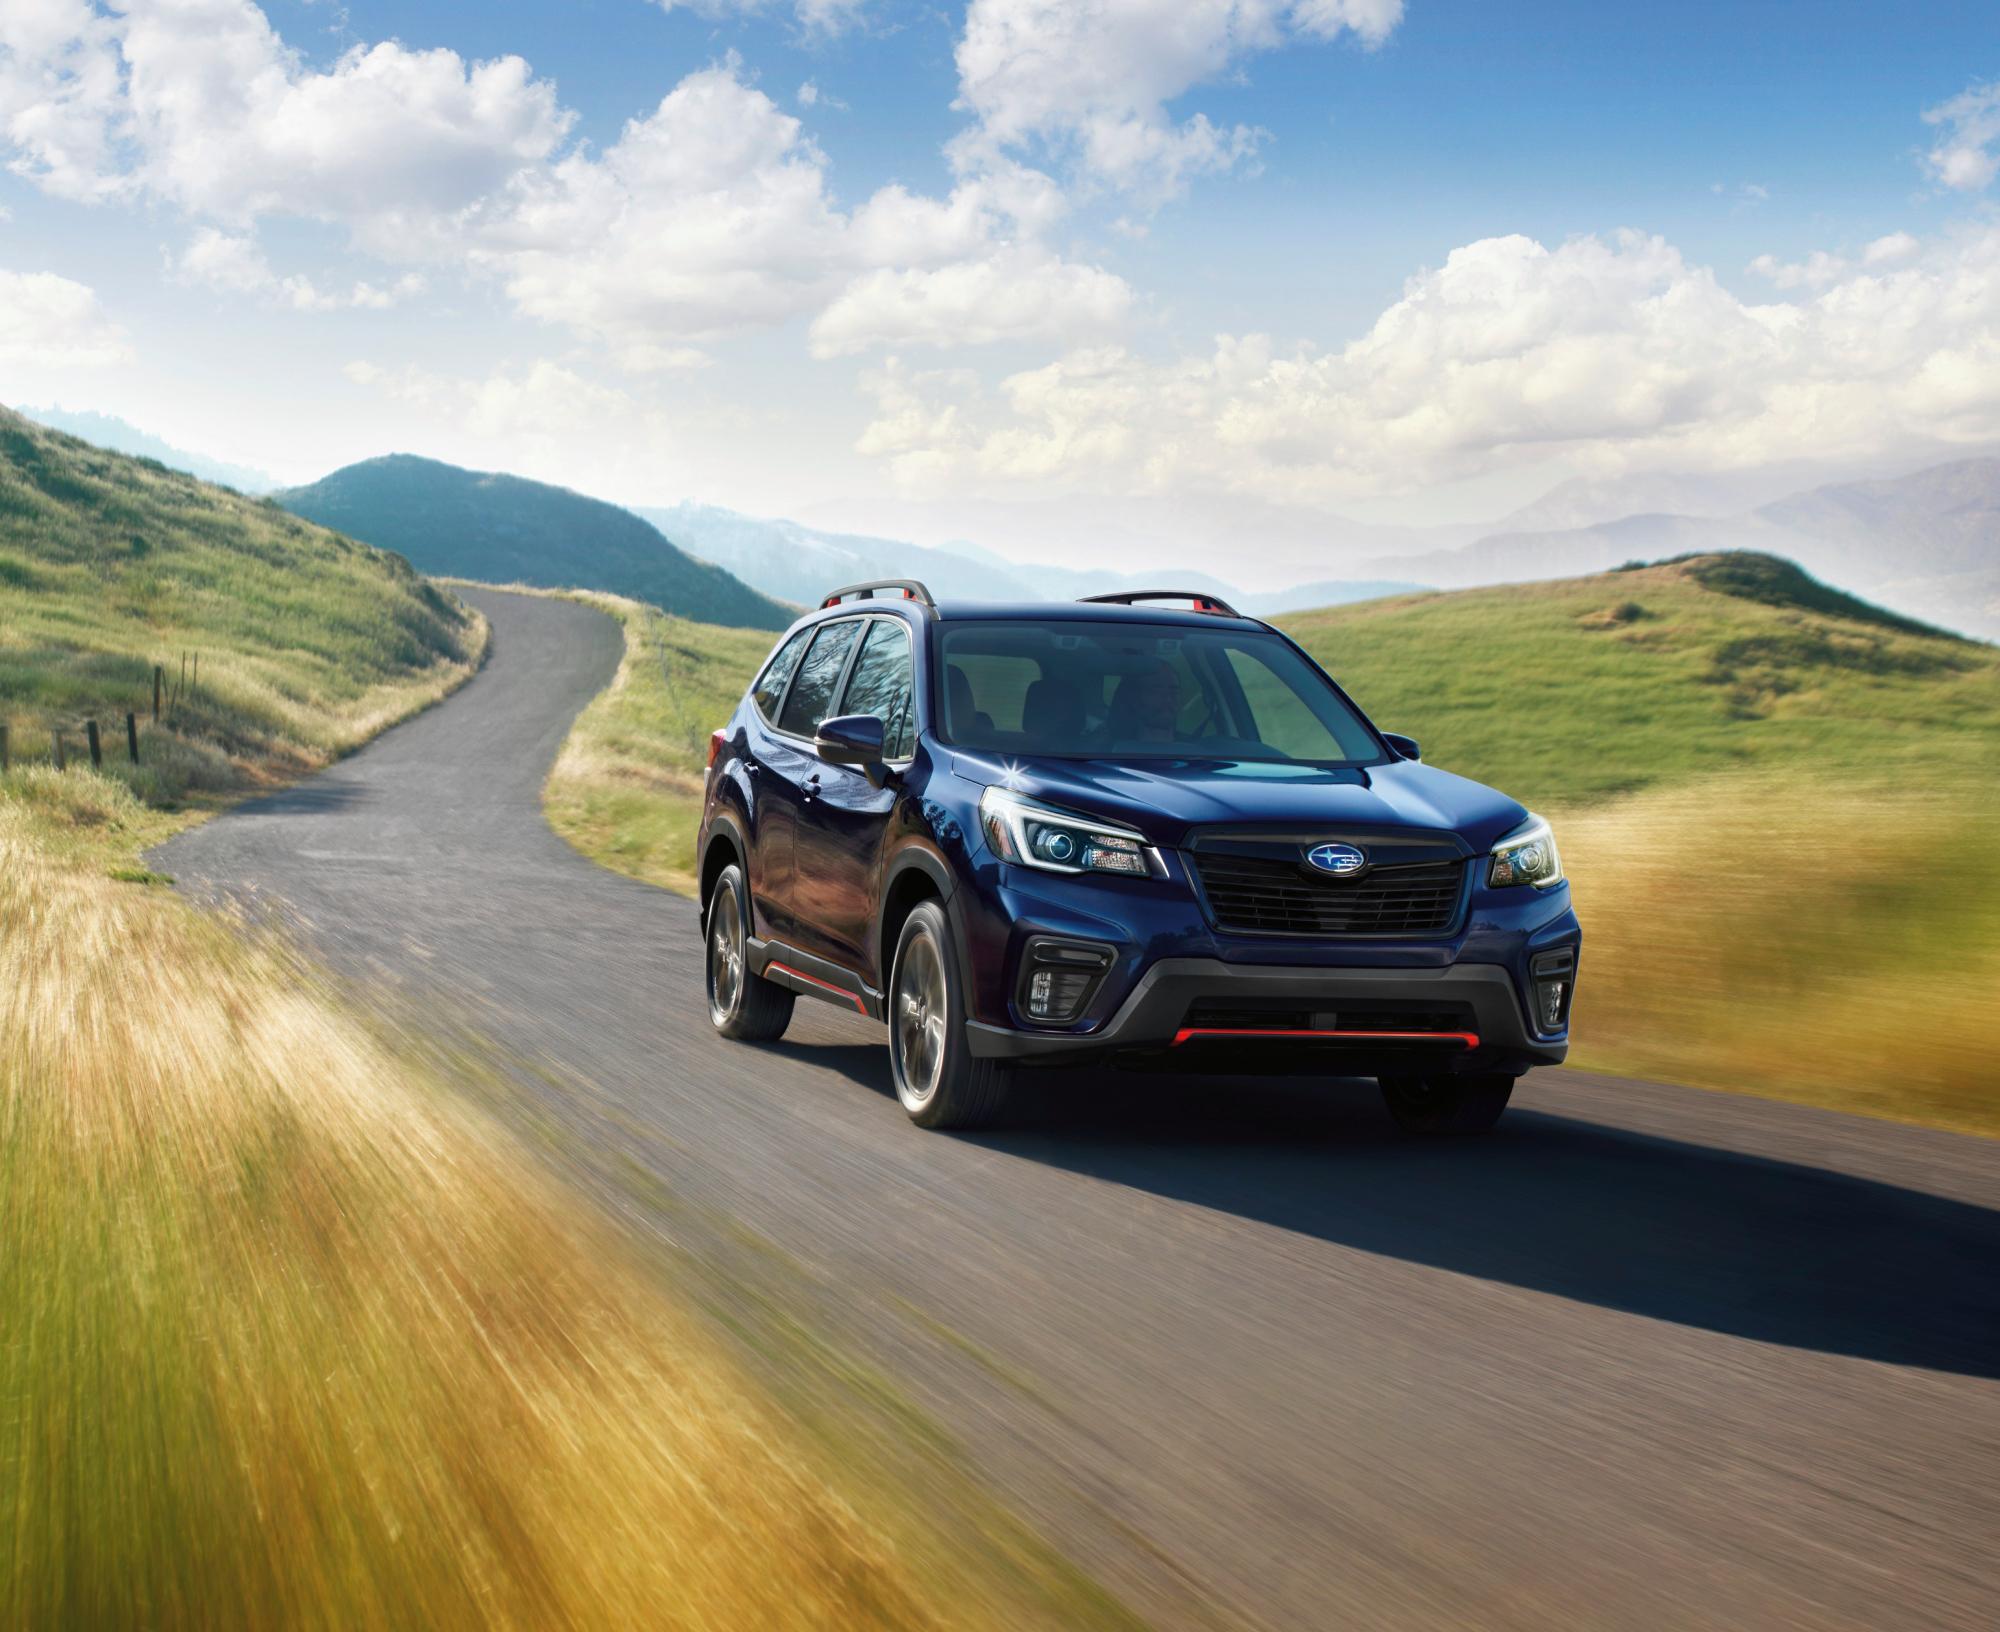 The 2021 Subaru Forester offers a smooth ride and user-friendly tech.